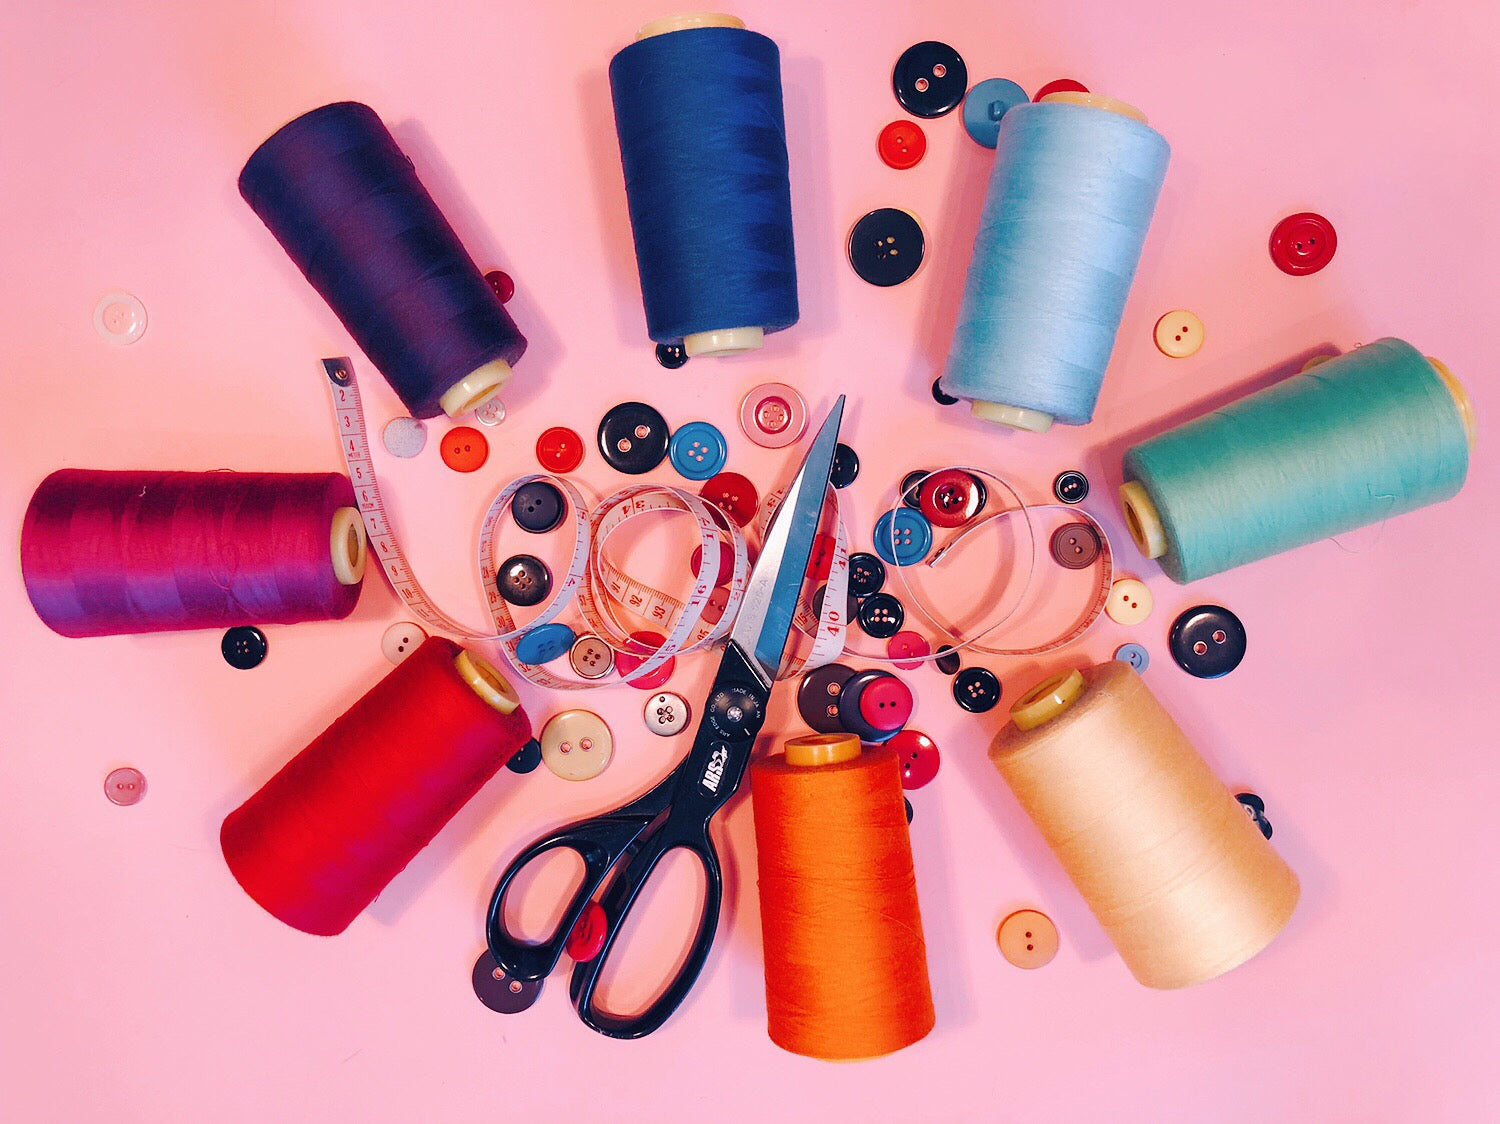 colorful rolls of thread buttons and scissors on pink background